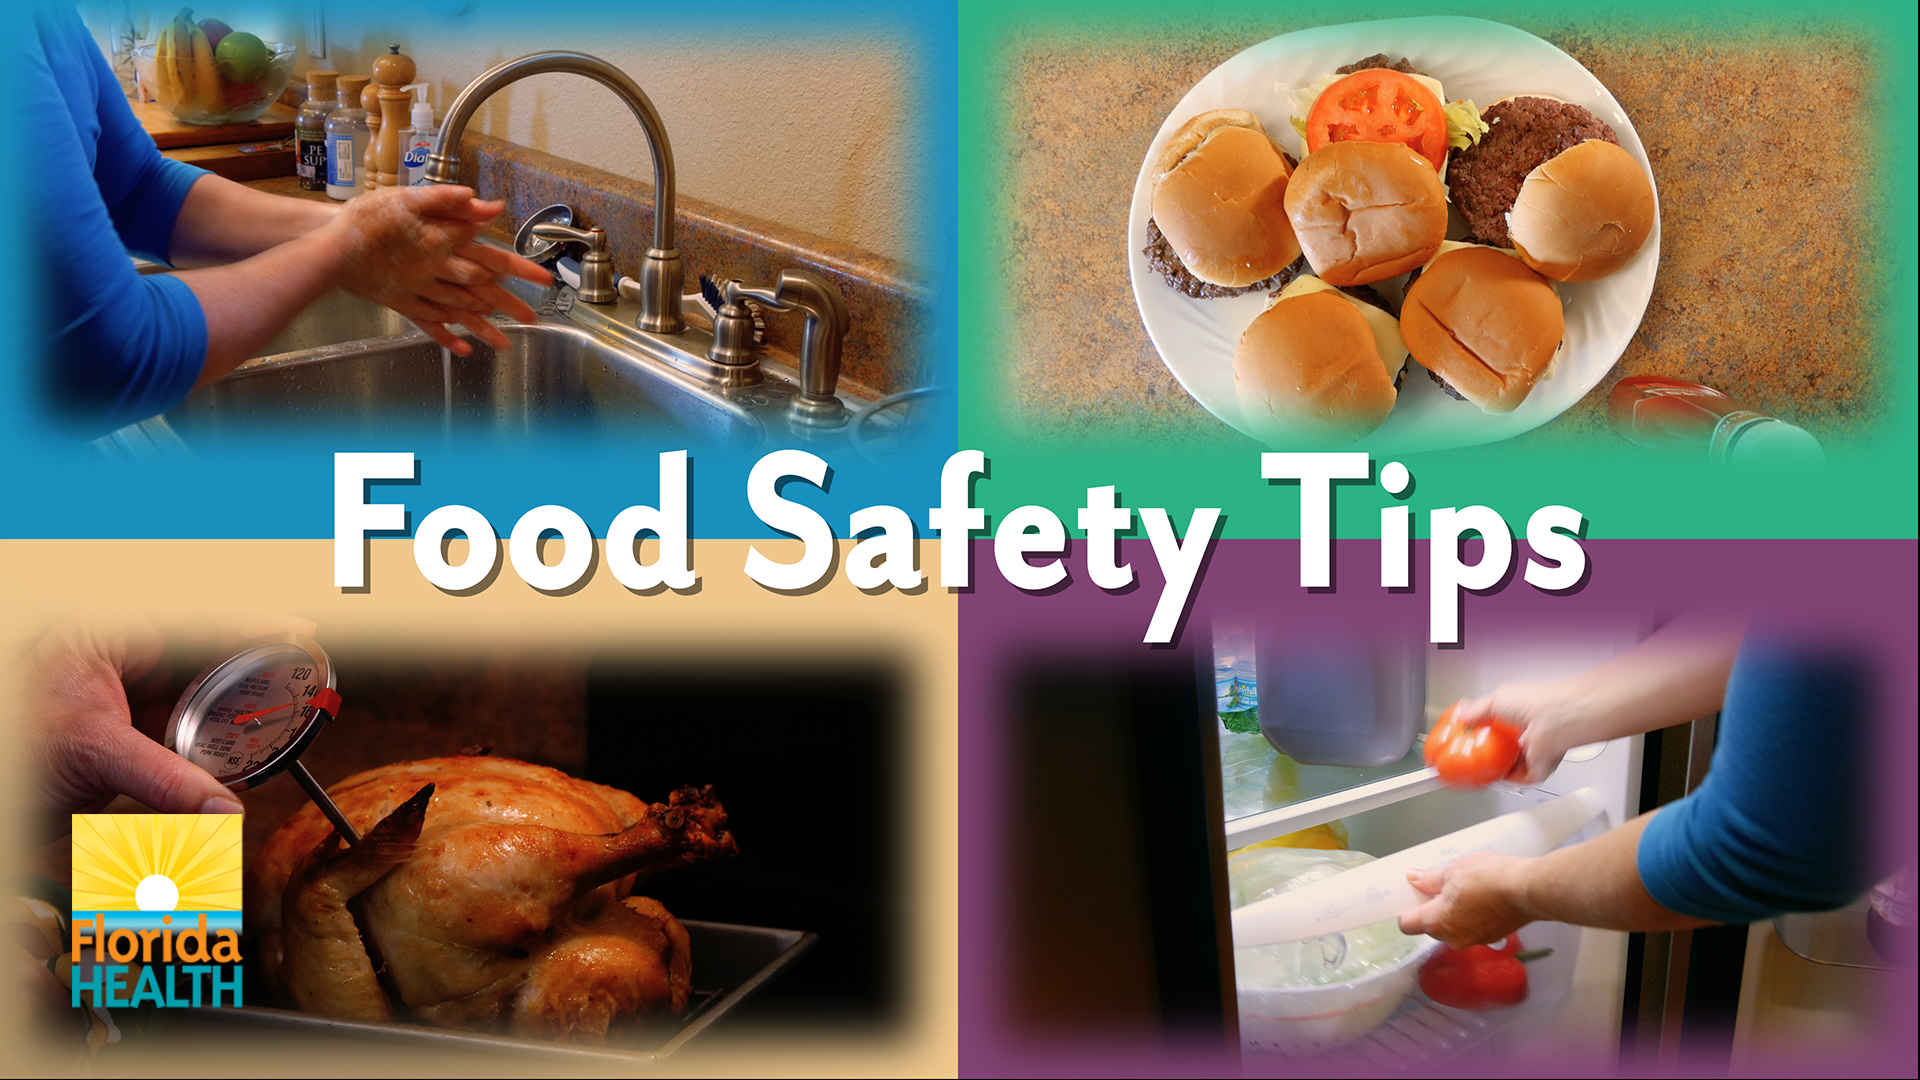 the Food Safety toolkit does not have an image associated with it, a blank white image is a default place holder.